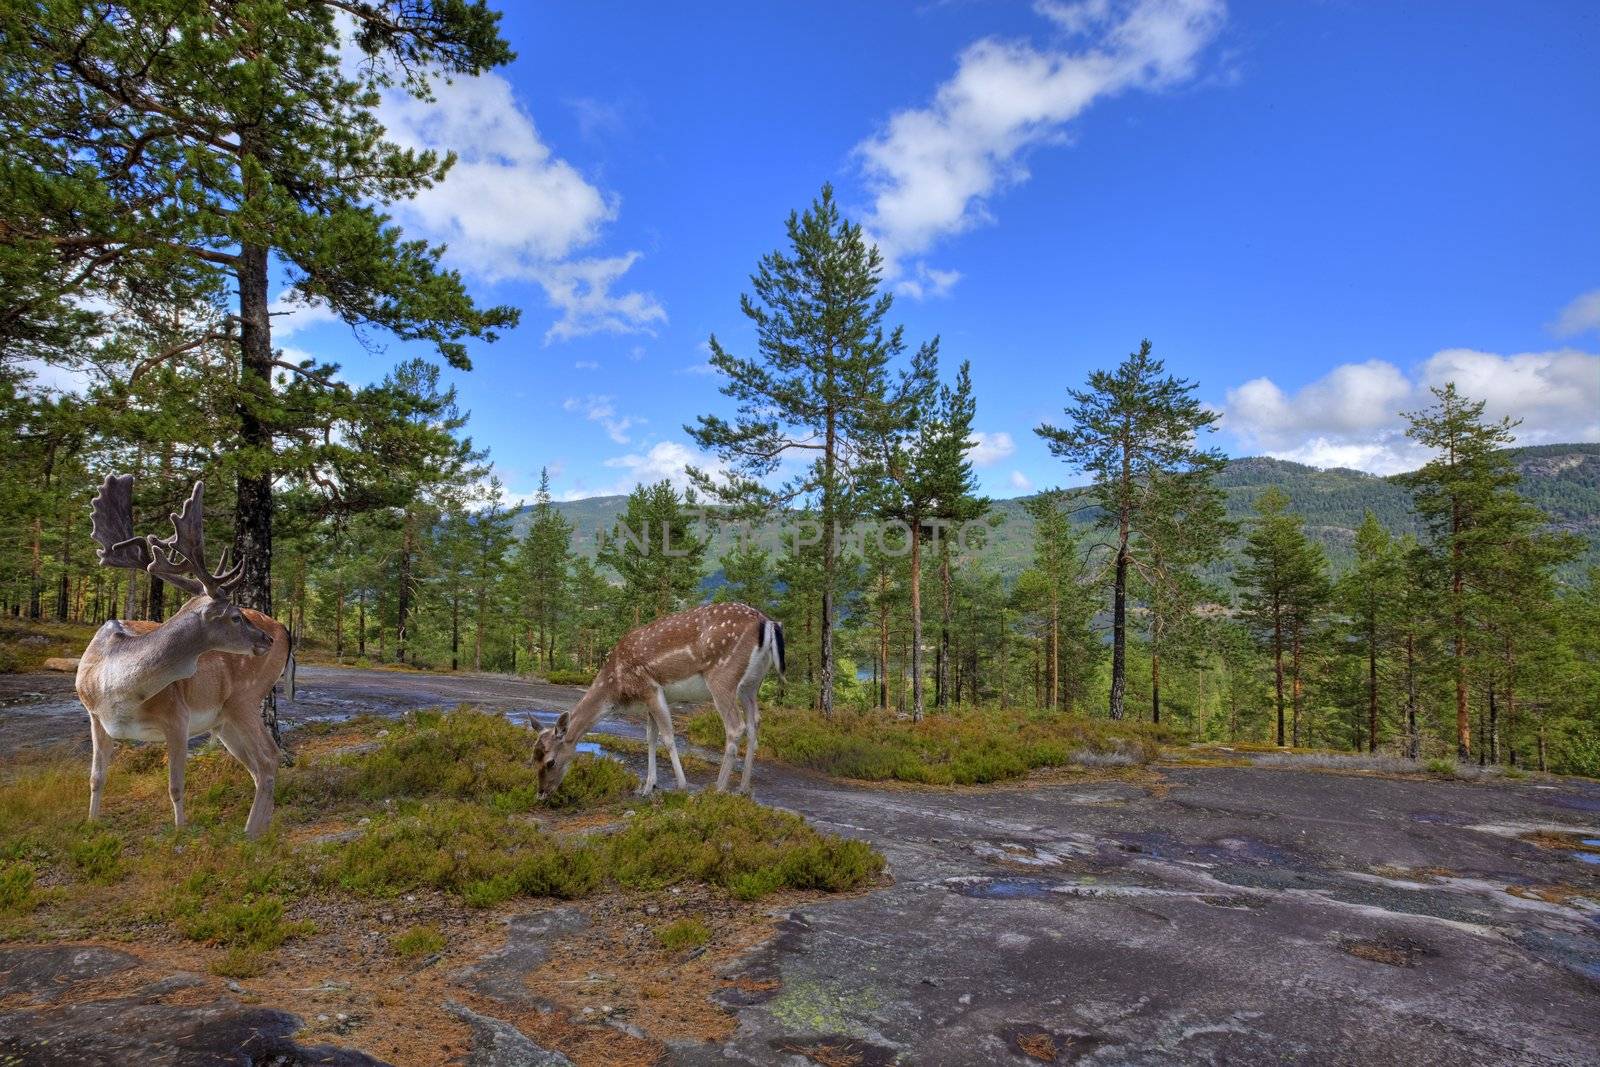 A male and a female deer in the norwegian forest